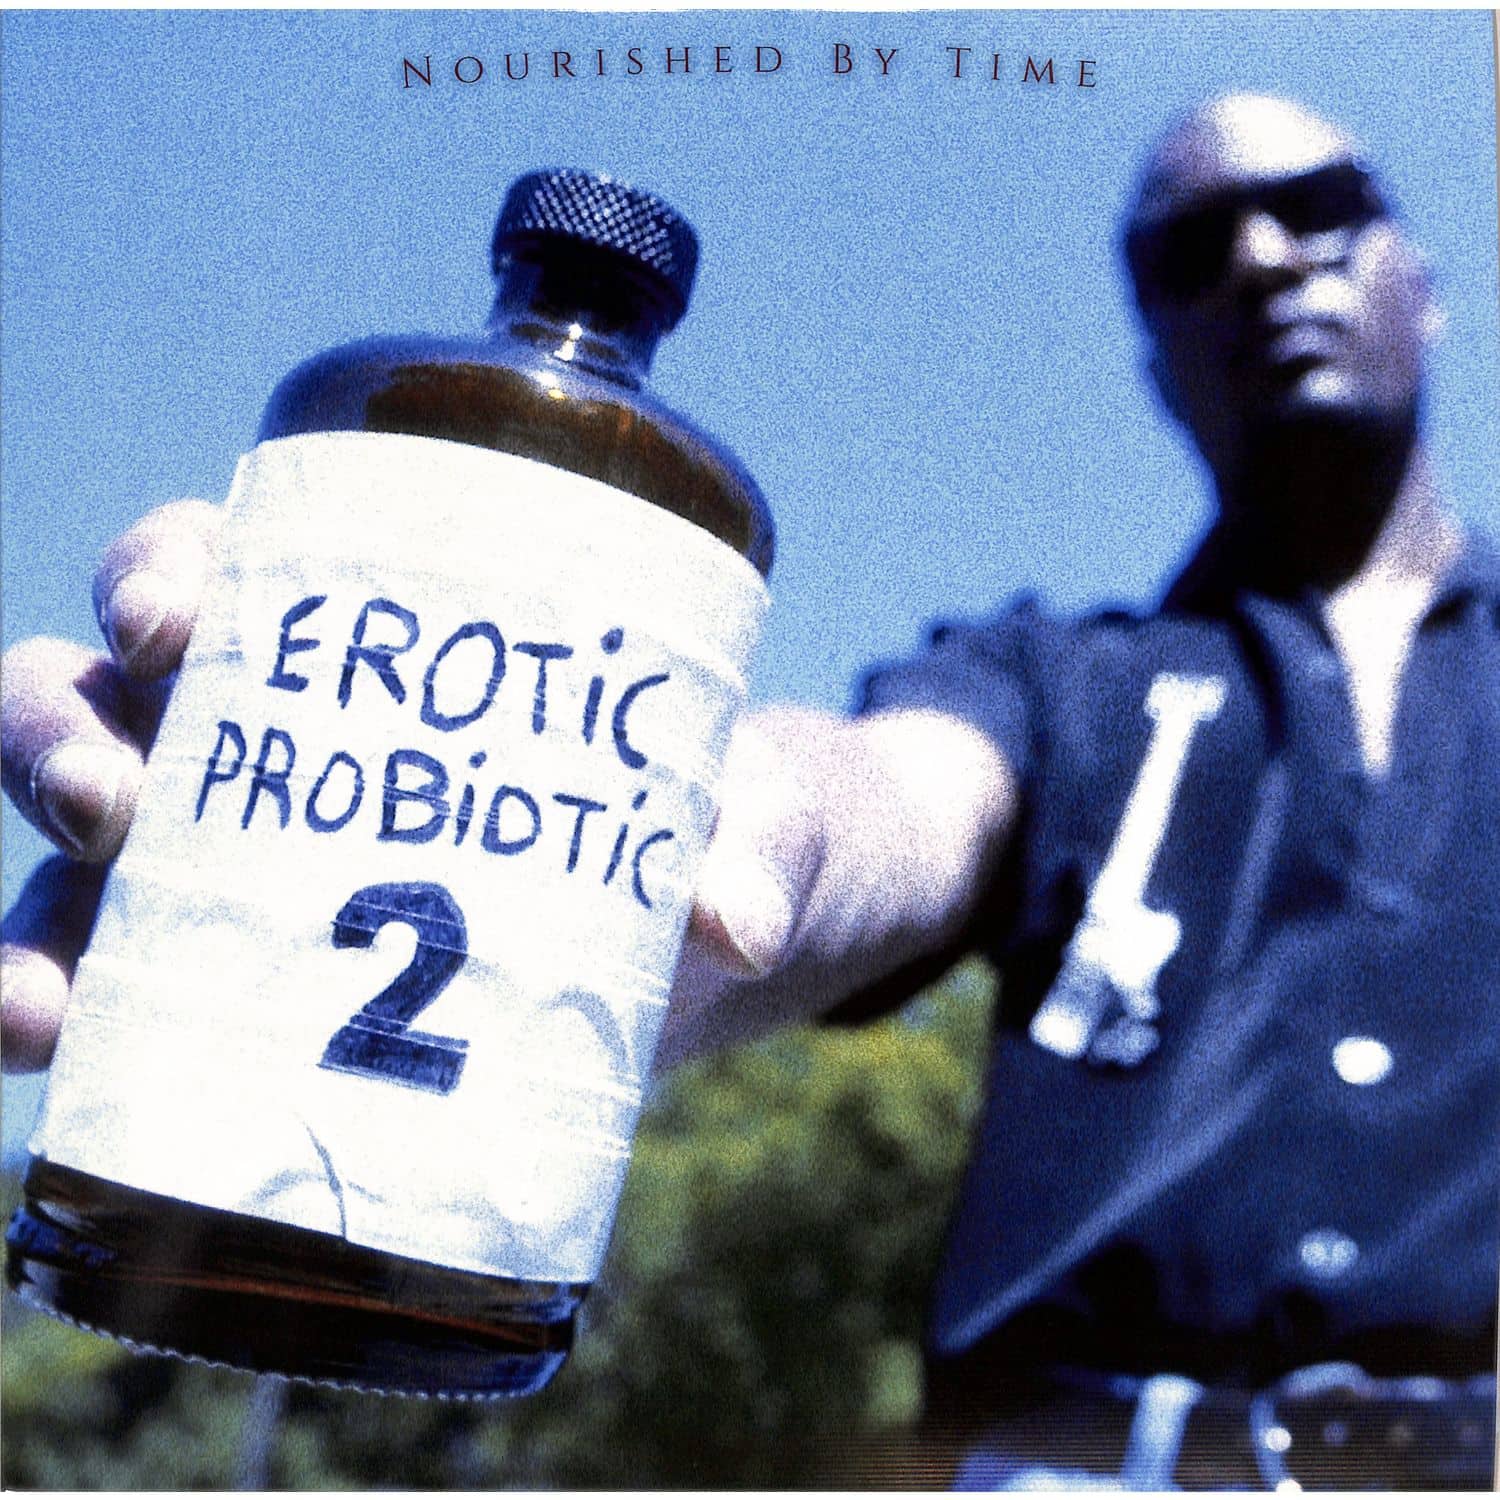 Nourished By time - EROTIC PROBIOTIC 2 